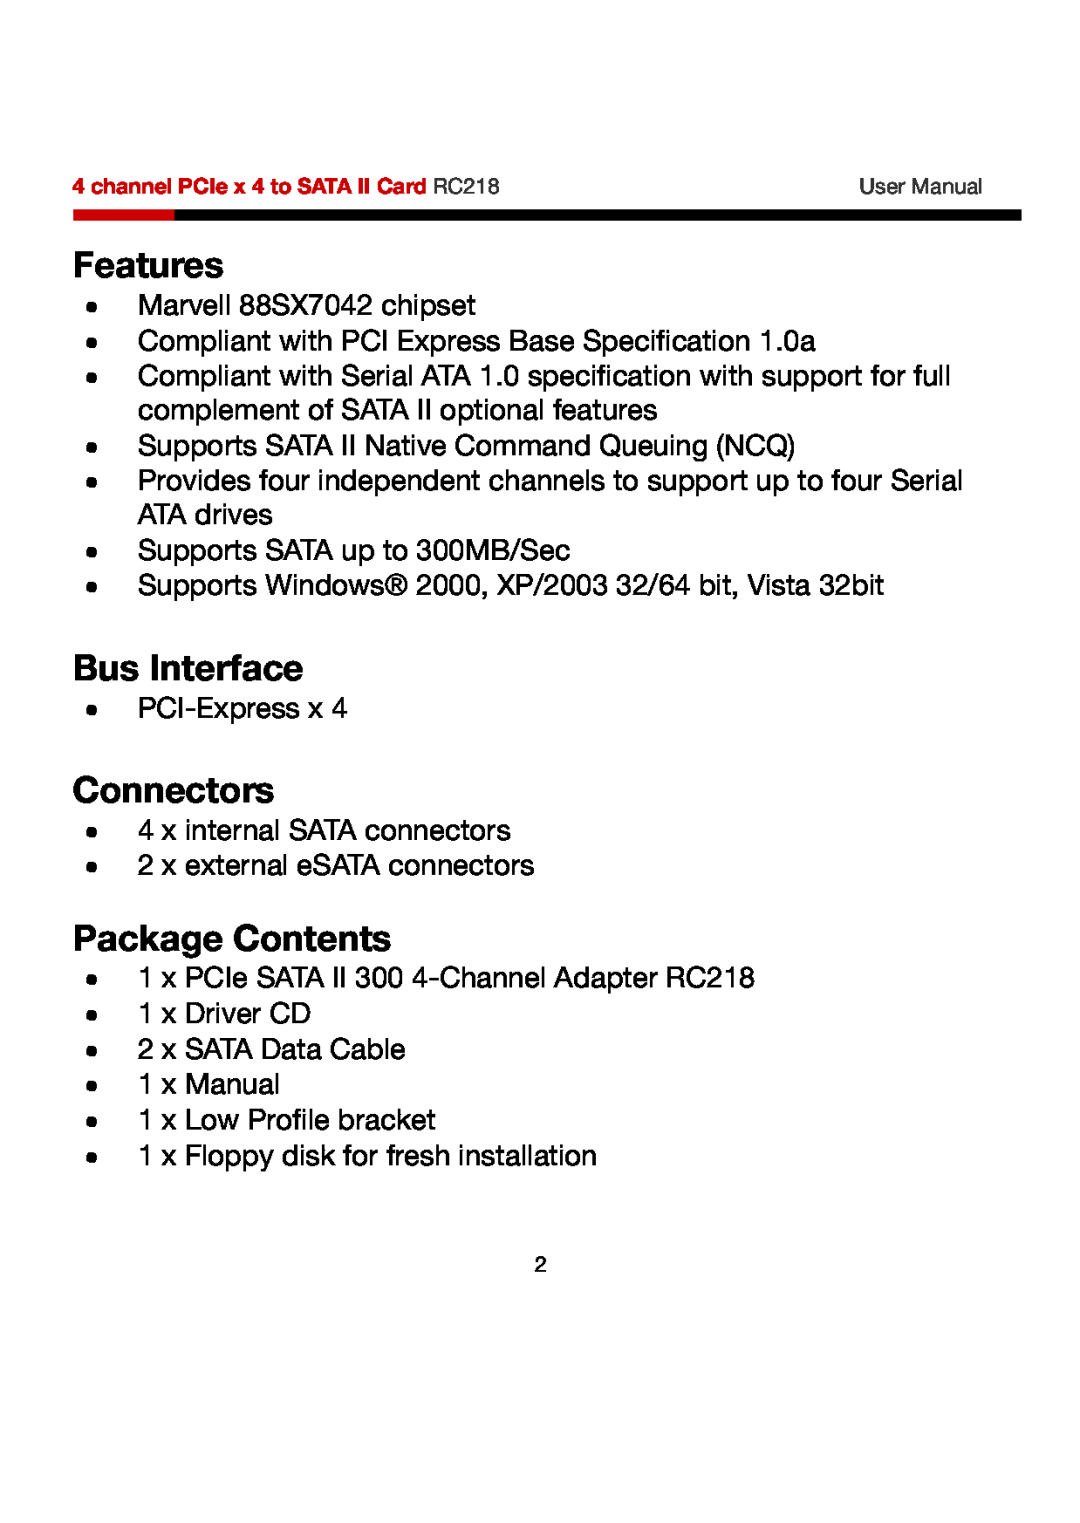 Rosewill RC218 user manual Features, Bus Interface, Connectors, Package Contents 